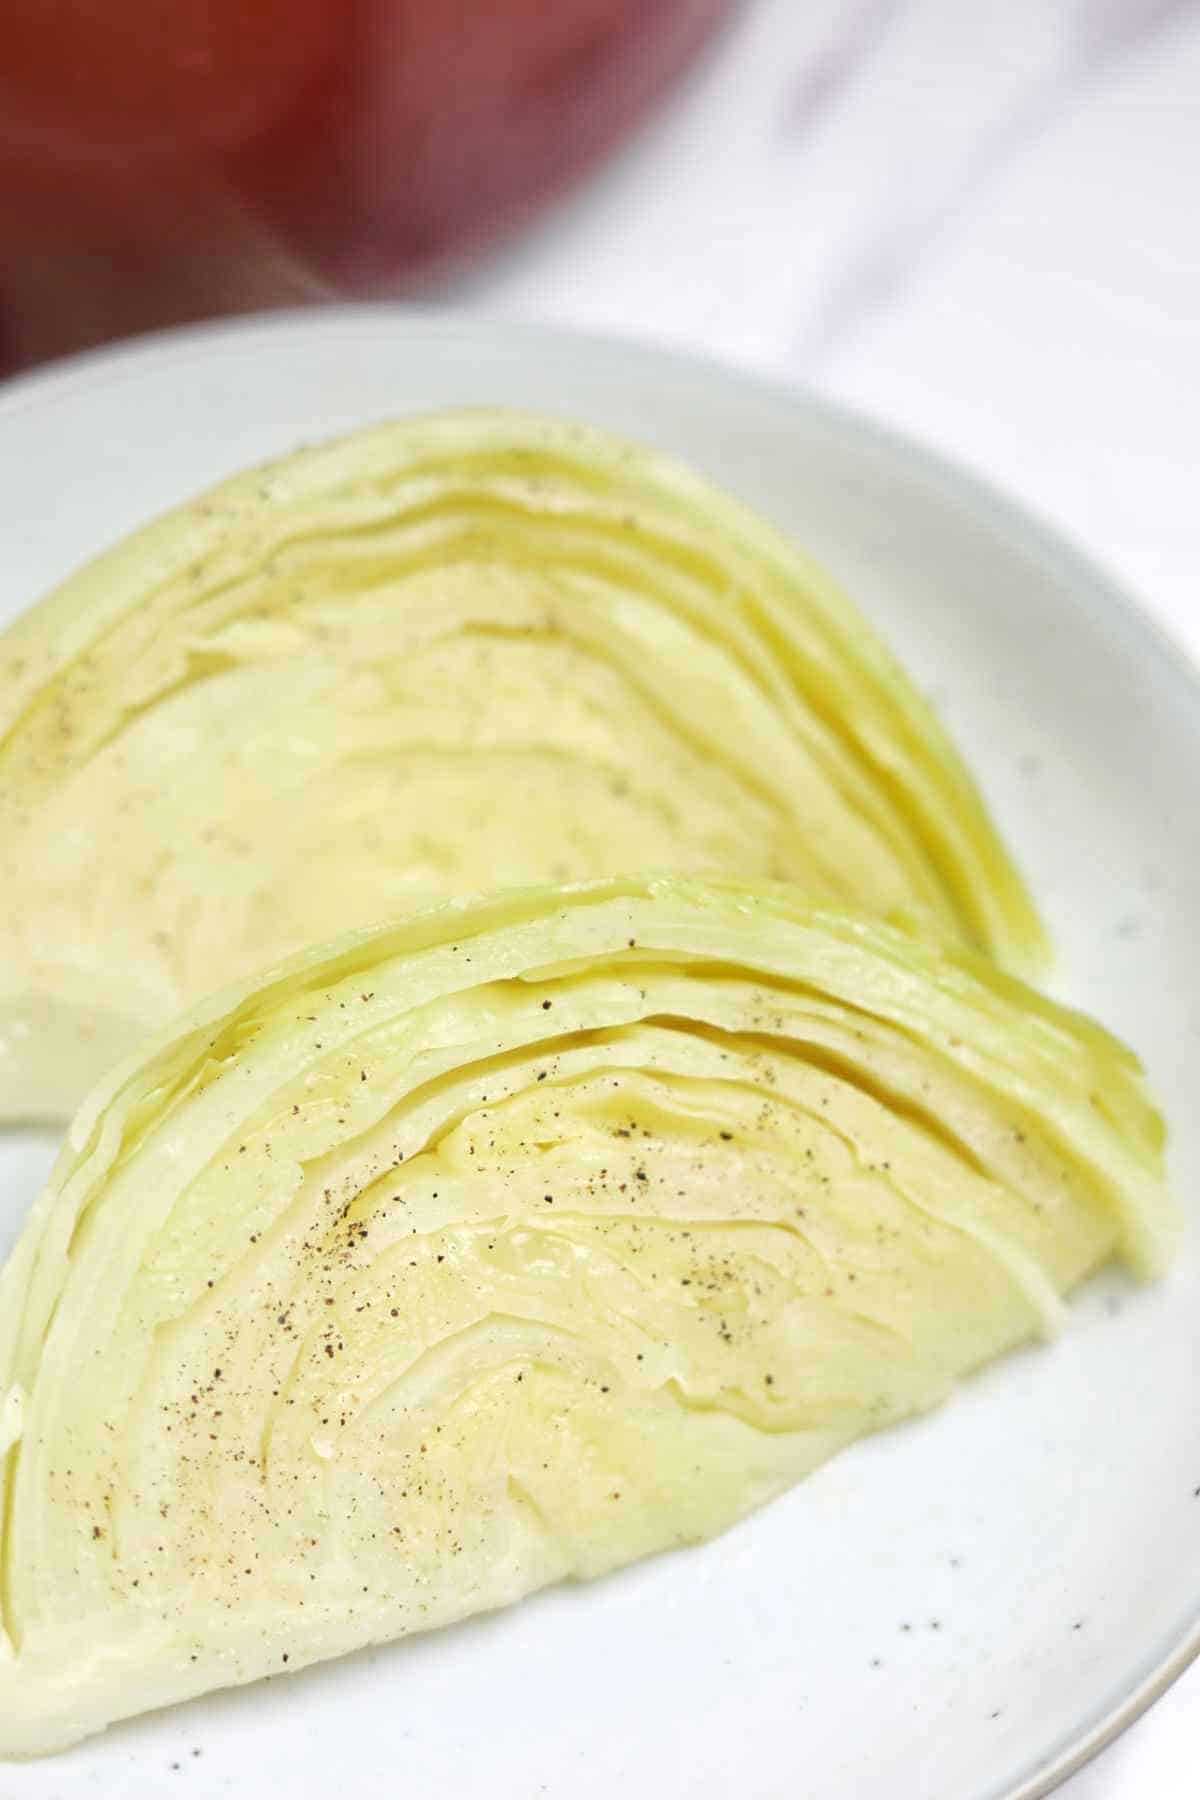 boiled cabbage served on a plate.